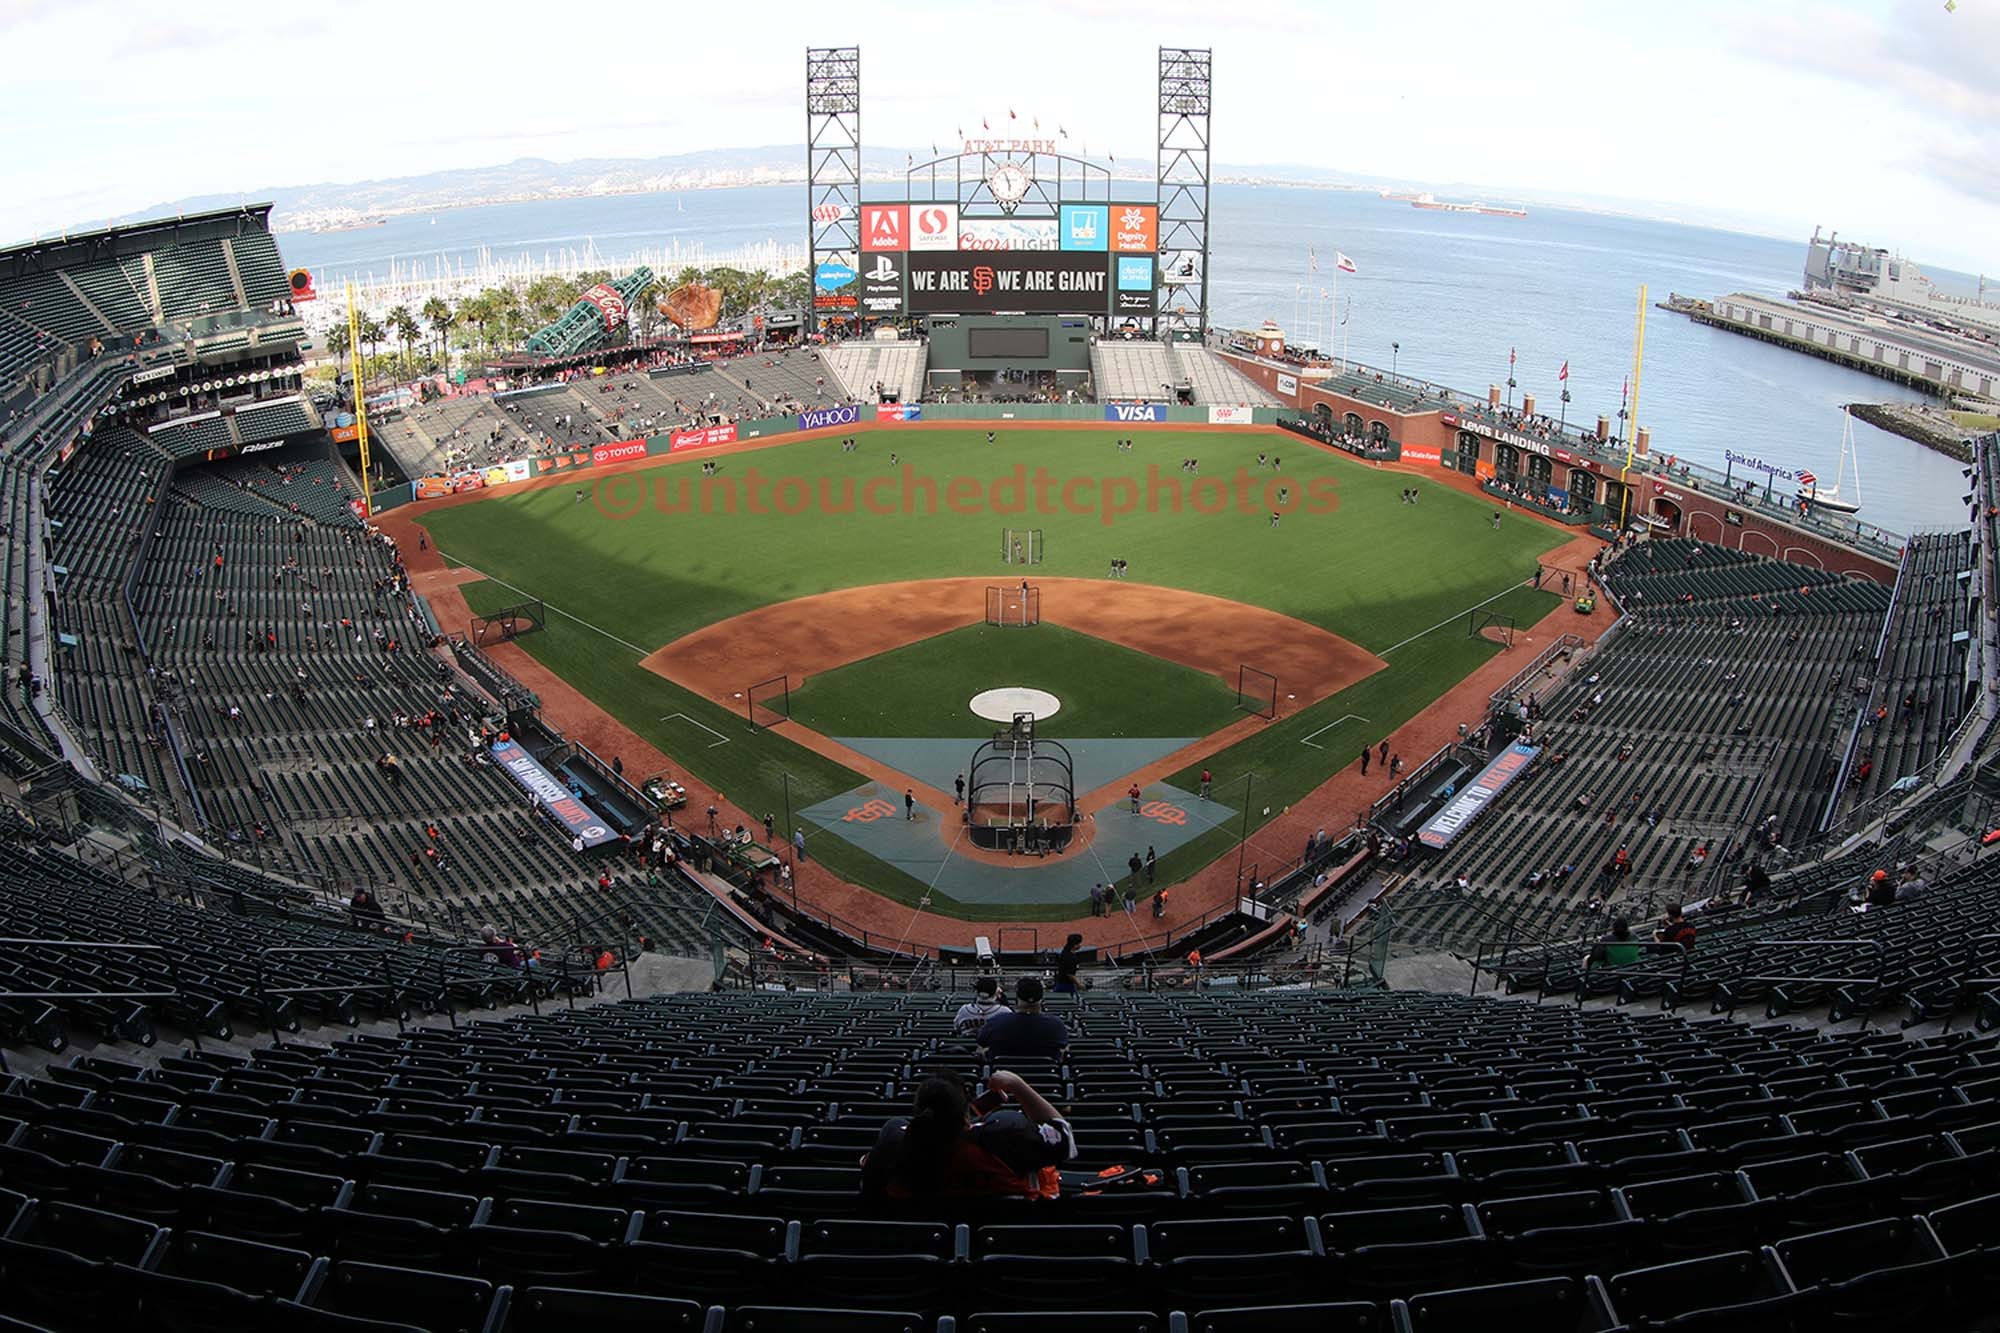 AT&T Park Upper Deck Behind Home Plate Before SF Giants Game 